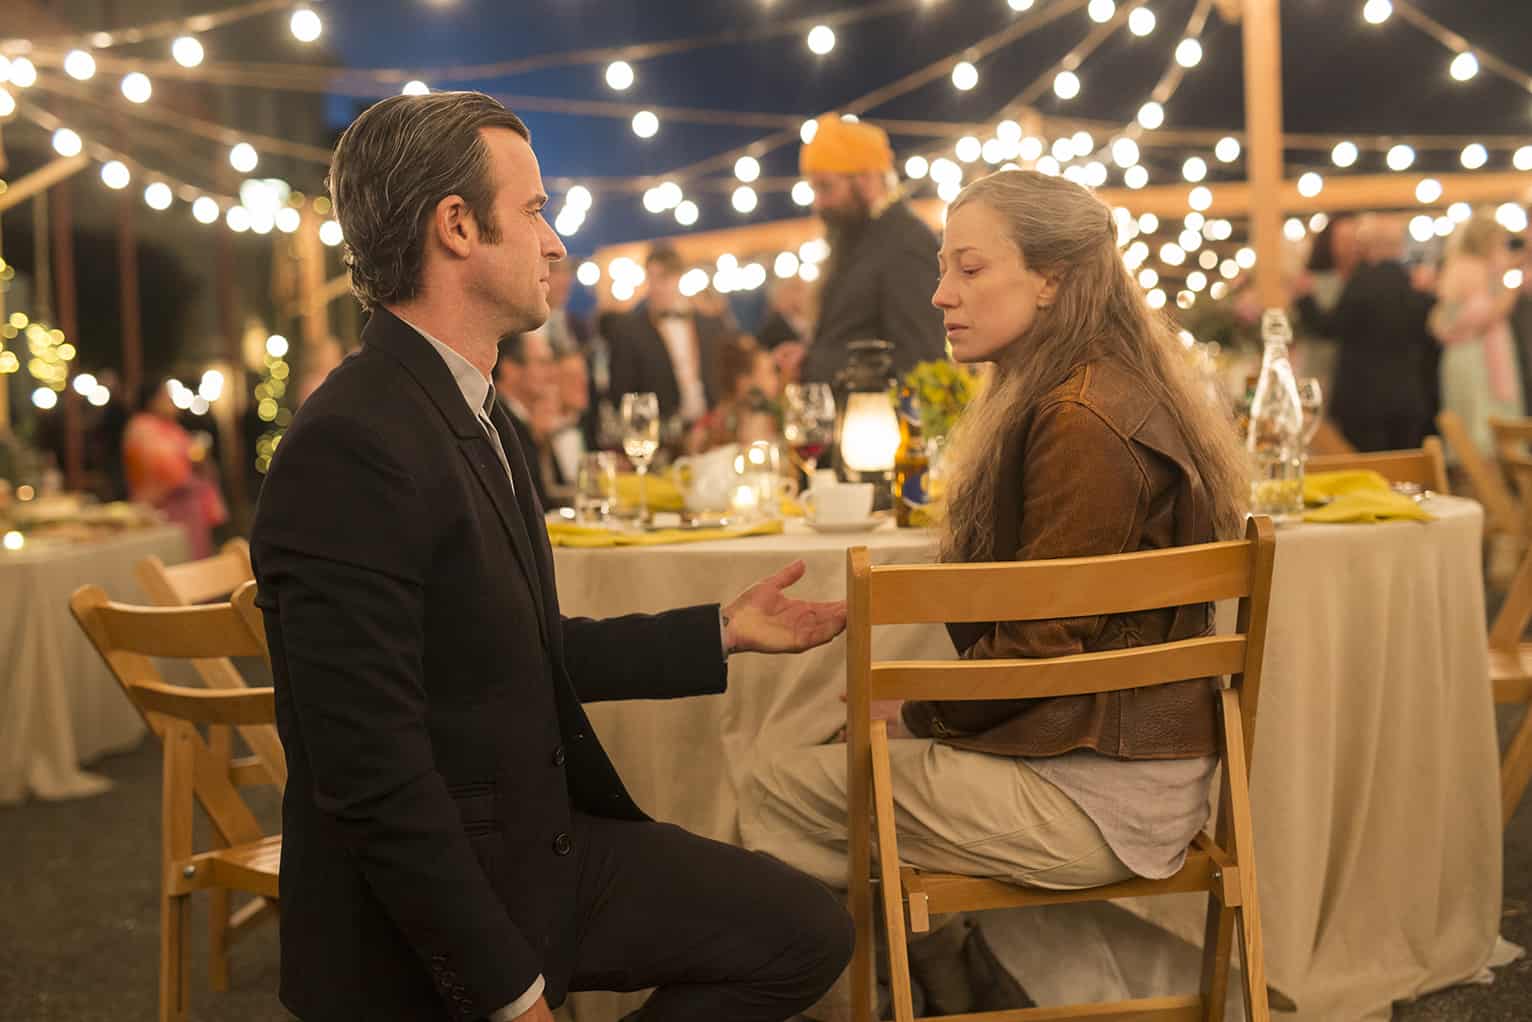 A man kneels in front of a woman at an outdoor table in this image from Warner Bros. Television.